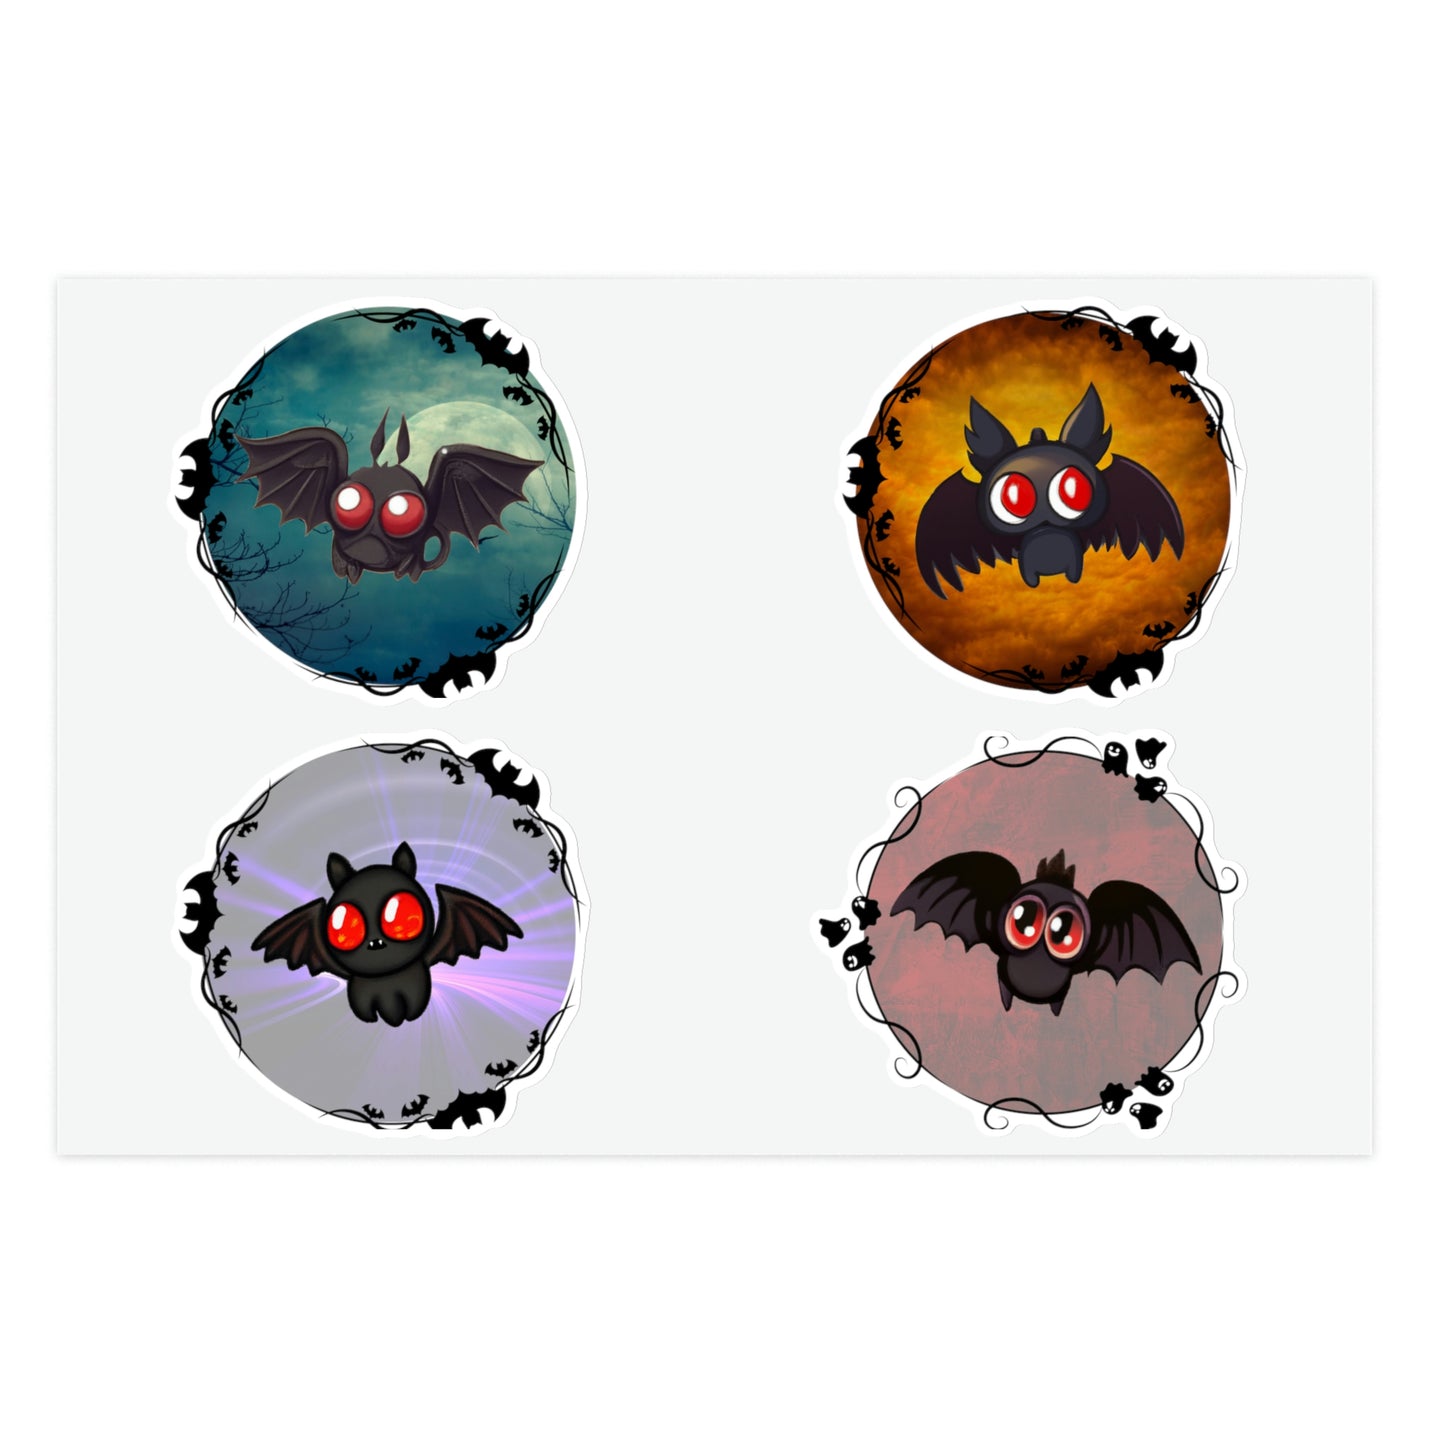 Adorable Pastel Goth Bat Demon Hell Spawn Sticker Sheet (set of 4) available in white or holographic! So Cute! Lord and Lady Towers